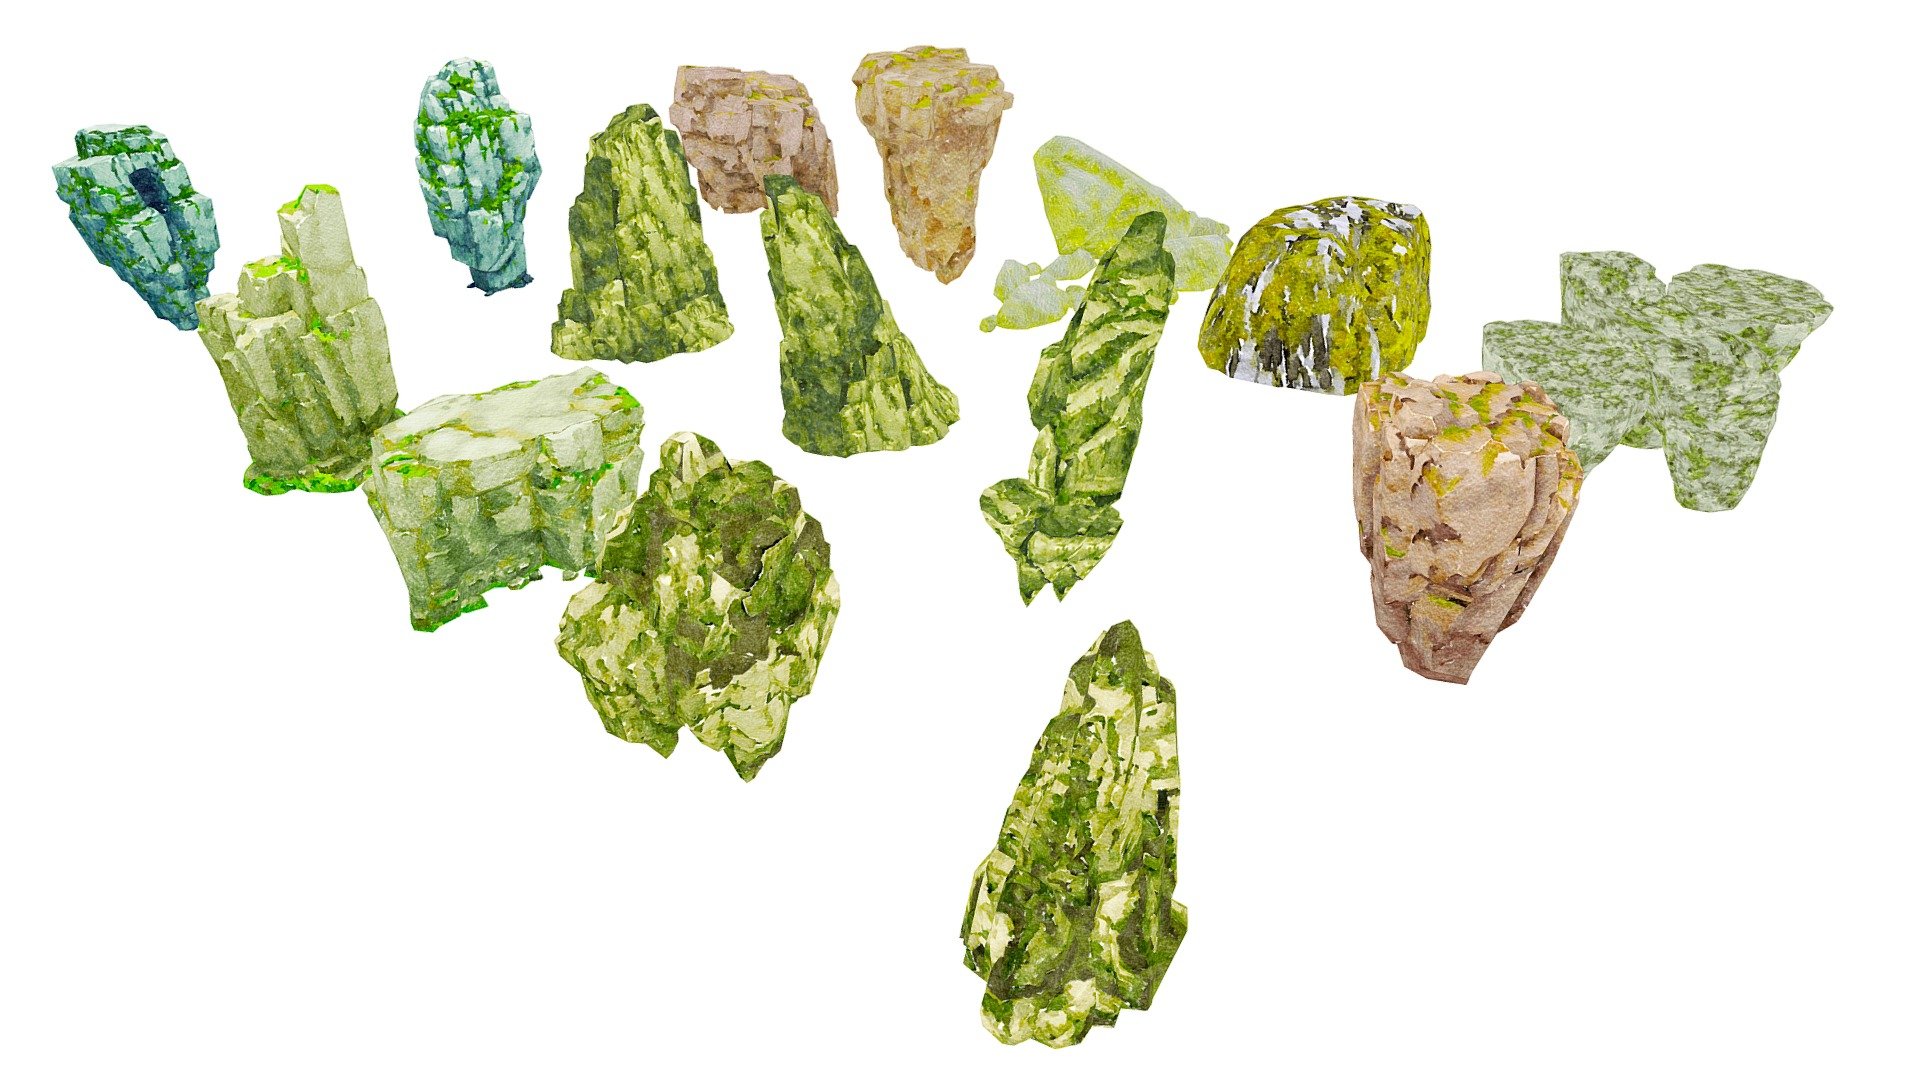 A package of low polygonal Rocks.The package contains 15 objects

Rock 1: 983 Poly, 497 Vert
Rock 2: 920 Poly, 598 Vert
Rock 3: 588 Poly, 592 Vert
Rock 4: 691 Poly, 649 Vert
Rock 5: 1017 Poly, 1154 Vert
Rock 6: 849 Poly, 749 Vert
Rock 7: 826 Poly, 532 Vert
Rock 8: 1519 Poly, 769 Vert
Rock 9: 1775 Poly, 899 Vert
Rock 10: 1329 Poly, 1086 Vert
Rock 11: 2799 Poly, 2002 Vert
Rock 12: 498 Poly, 273 Vert
Rock 13: 2065 Poly, 1078 Vert
Rock 14: 3110 Poly, 1822 Vert
Rock 15: 1278 Poly, 940 Vert




Only Textures Diffus duplicated in resolution 2048 x 2048. Format textures of PNG. Files include: 3Dsmax, 3Ds, Obj, Fbx and folder with textures. Ready import to game project (Unity, Unreal)
If there is a need for any type of model, send a message! We will provide. 
Thanks for your interest and love! 



Note: Watercolor style illustrations 
It is recommended to use flat lighting or shaderless material - Rock Illustration Collection Part 2 - 3D model by josluat91 3d model